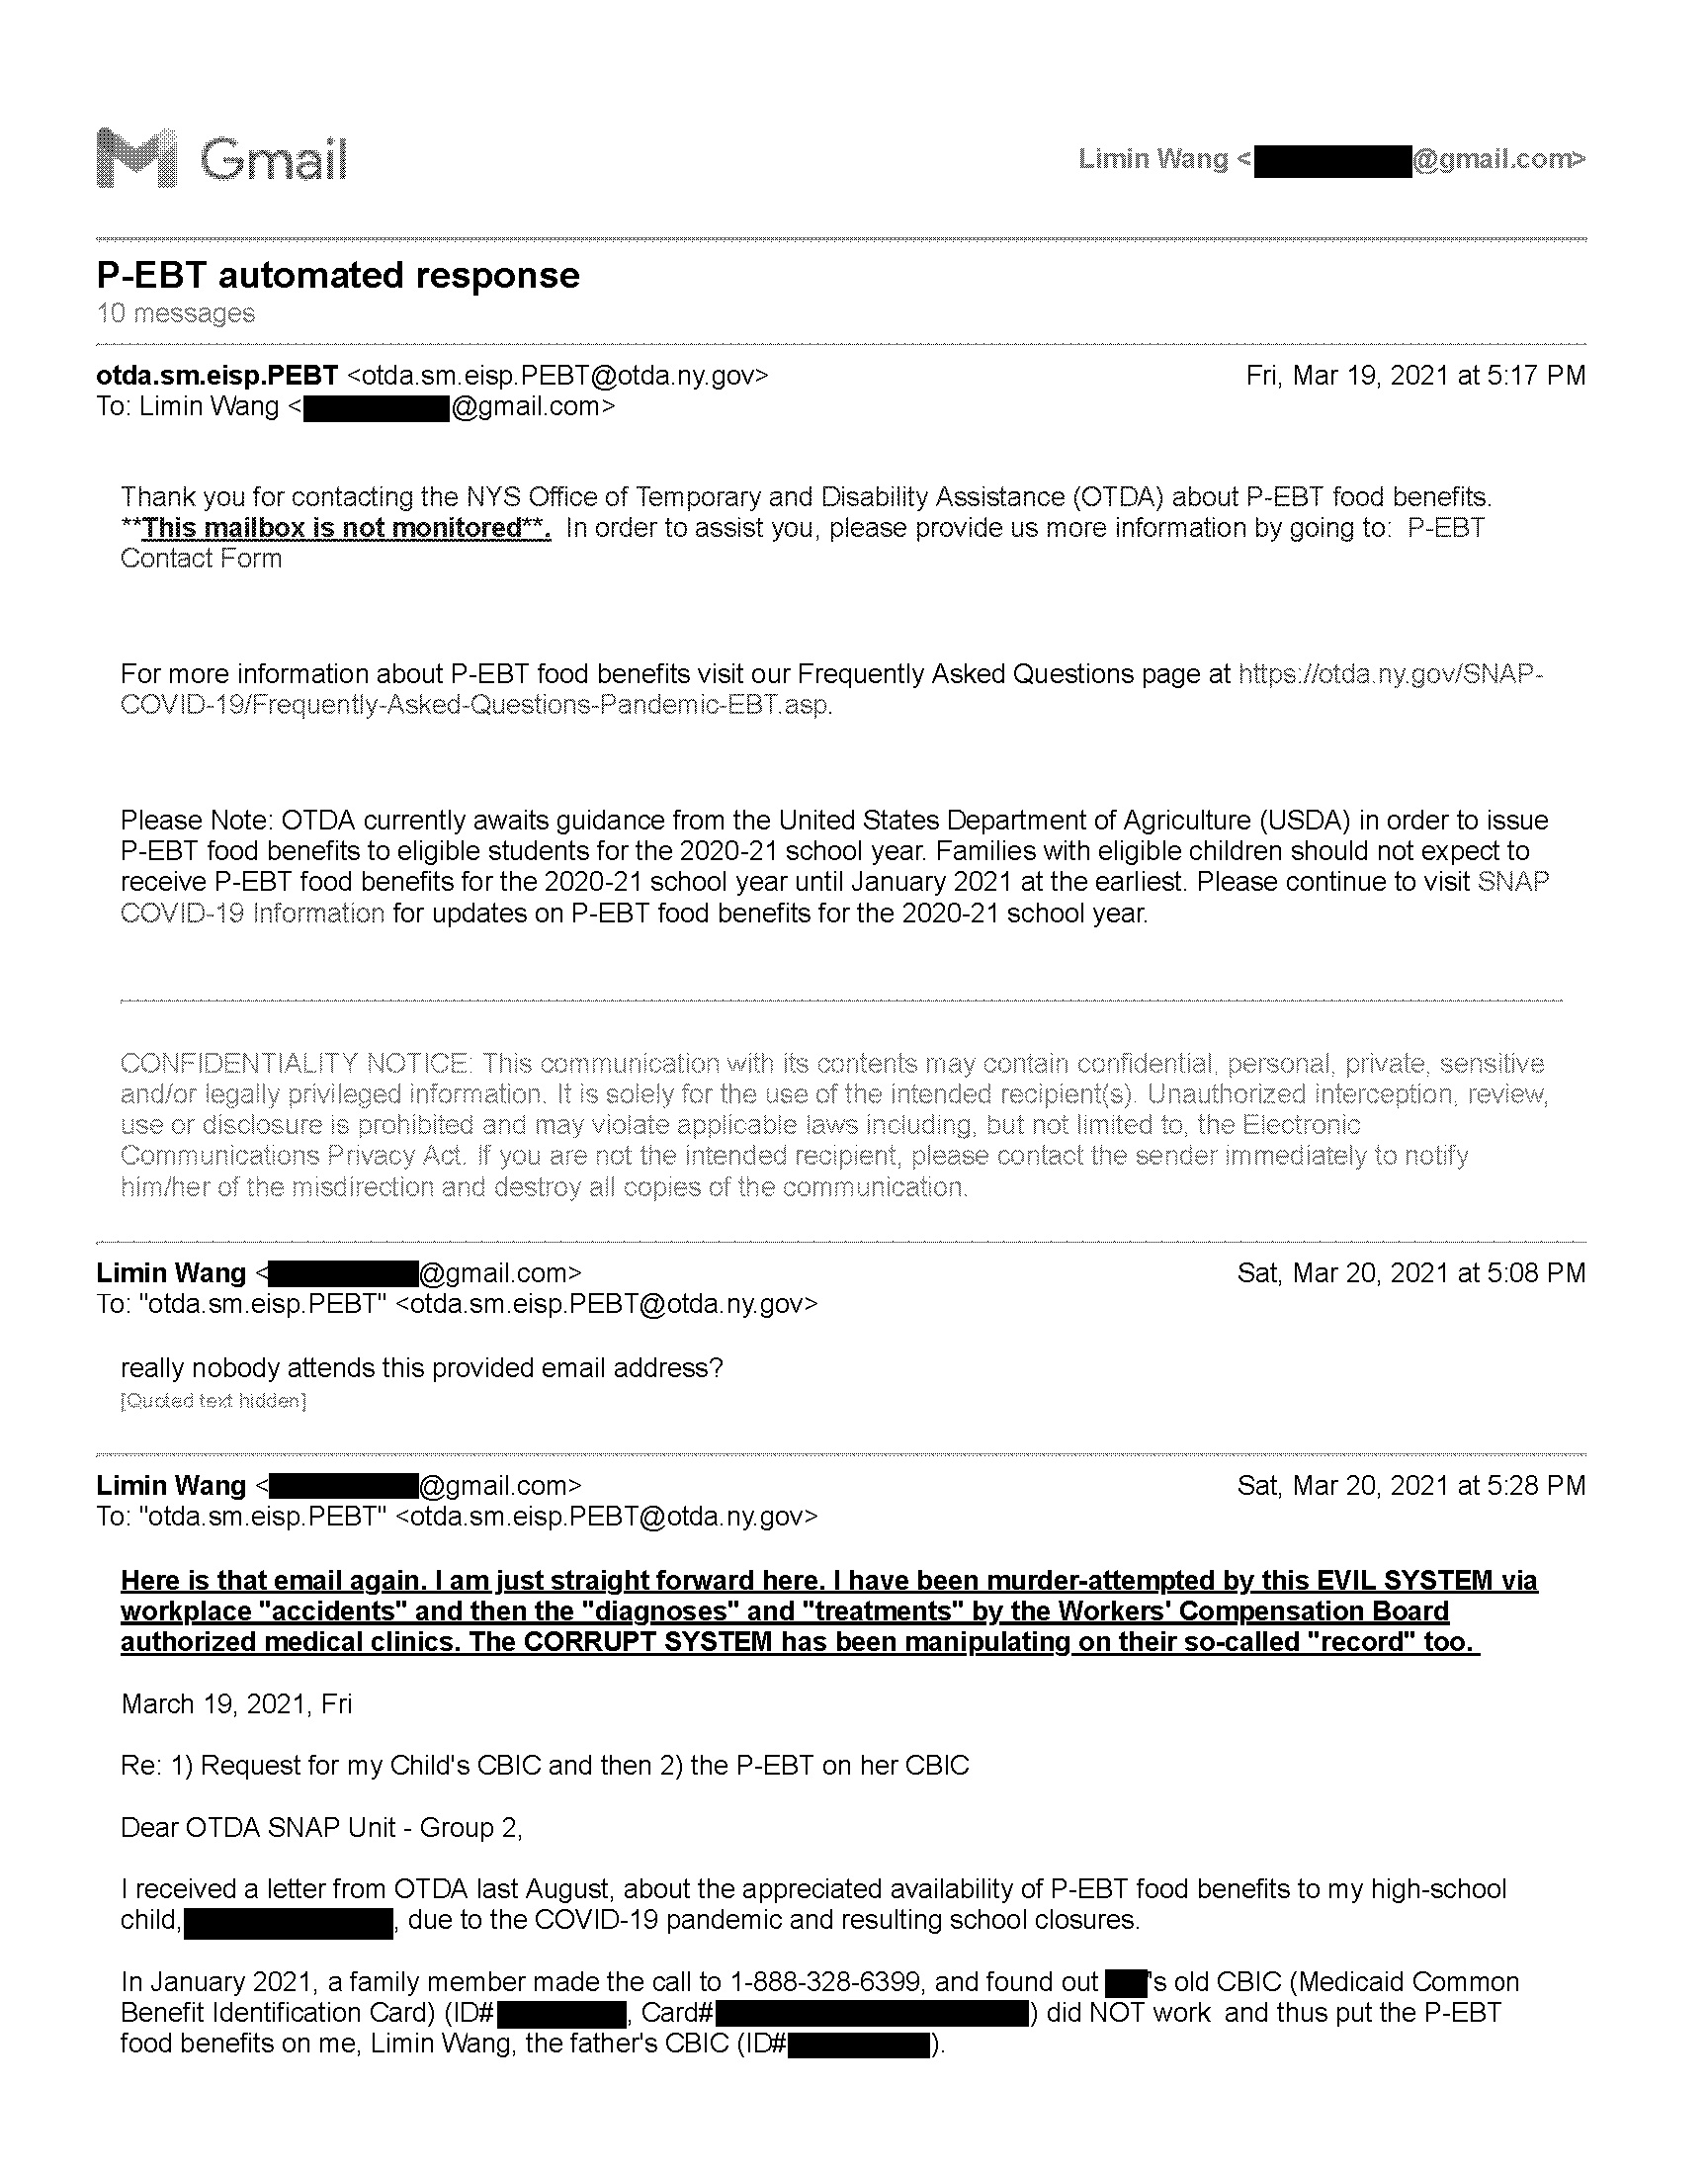 My replies to P-EBT automated response Mar 19 to 25 modified p1of5.jpg